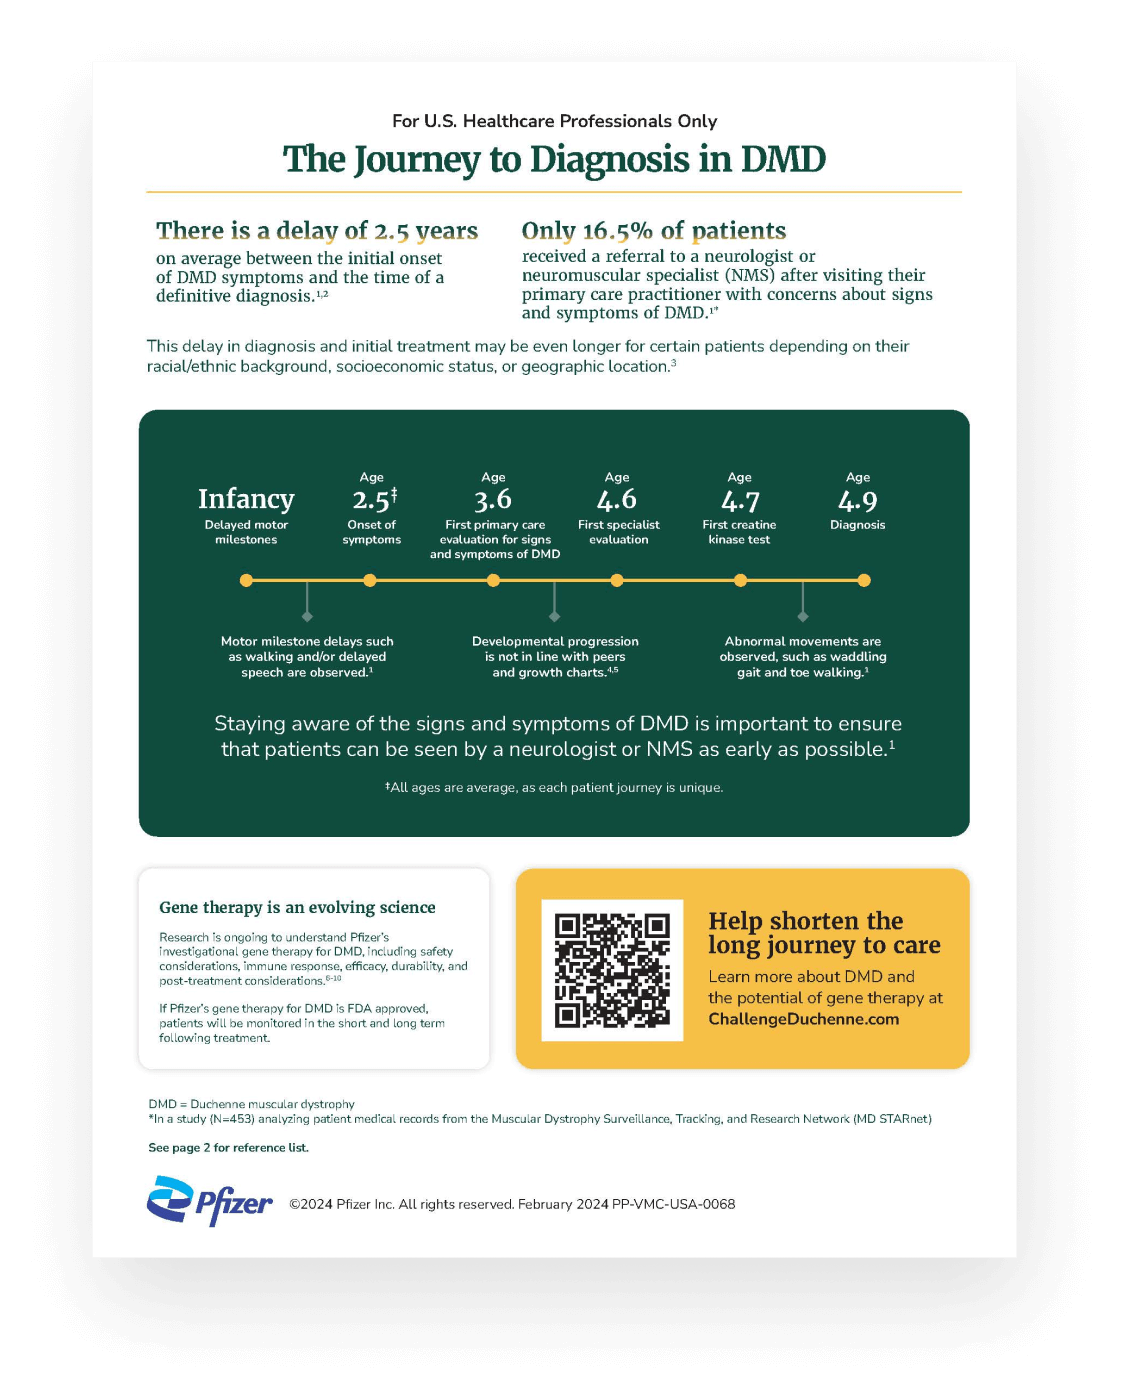 Thumbnail of downloadable Spanish resource about the journey to DMD diagnosis